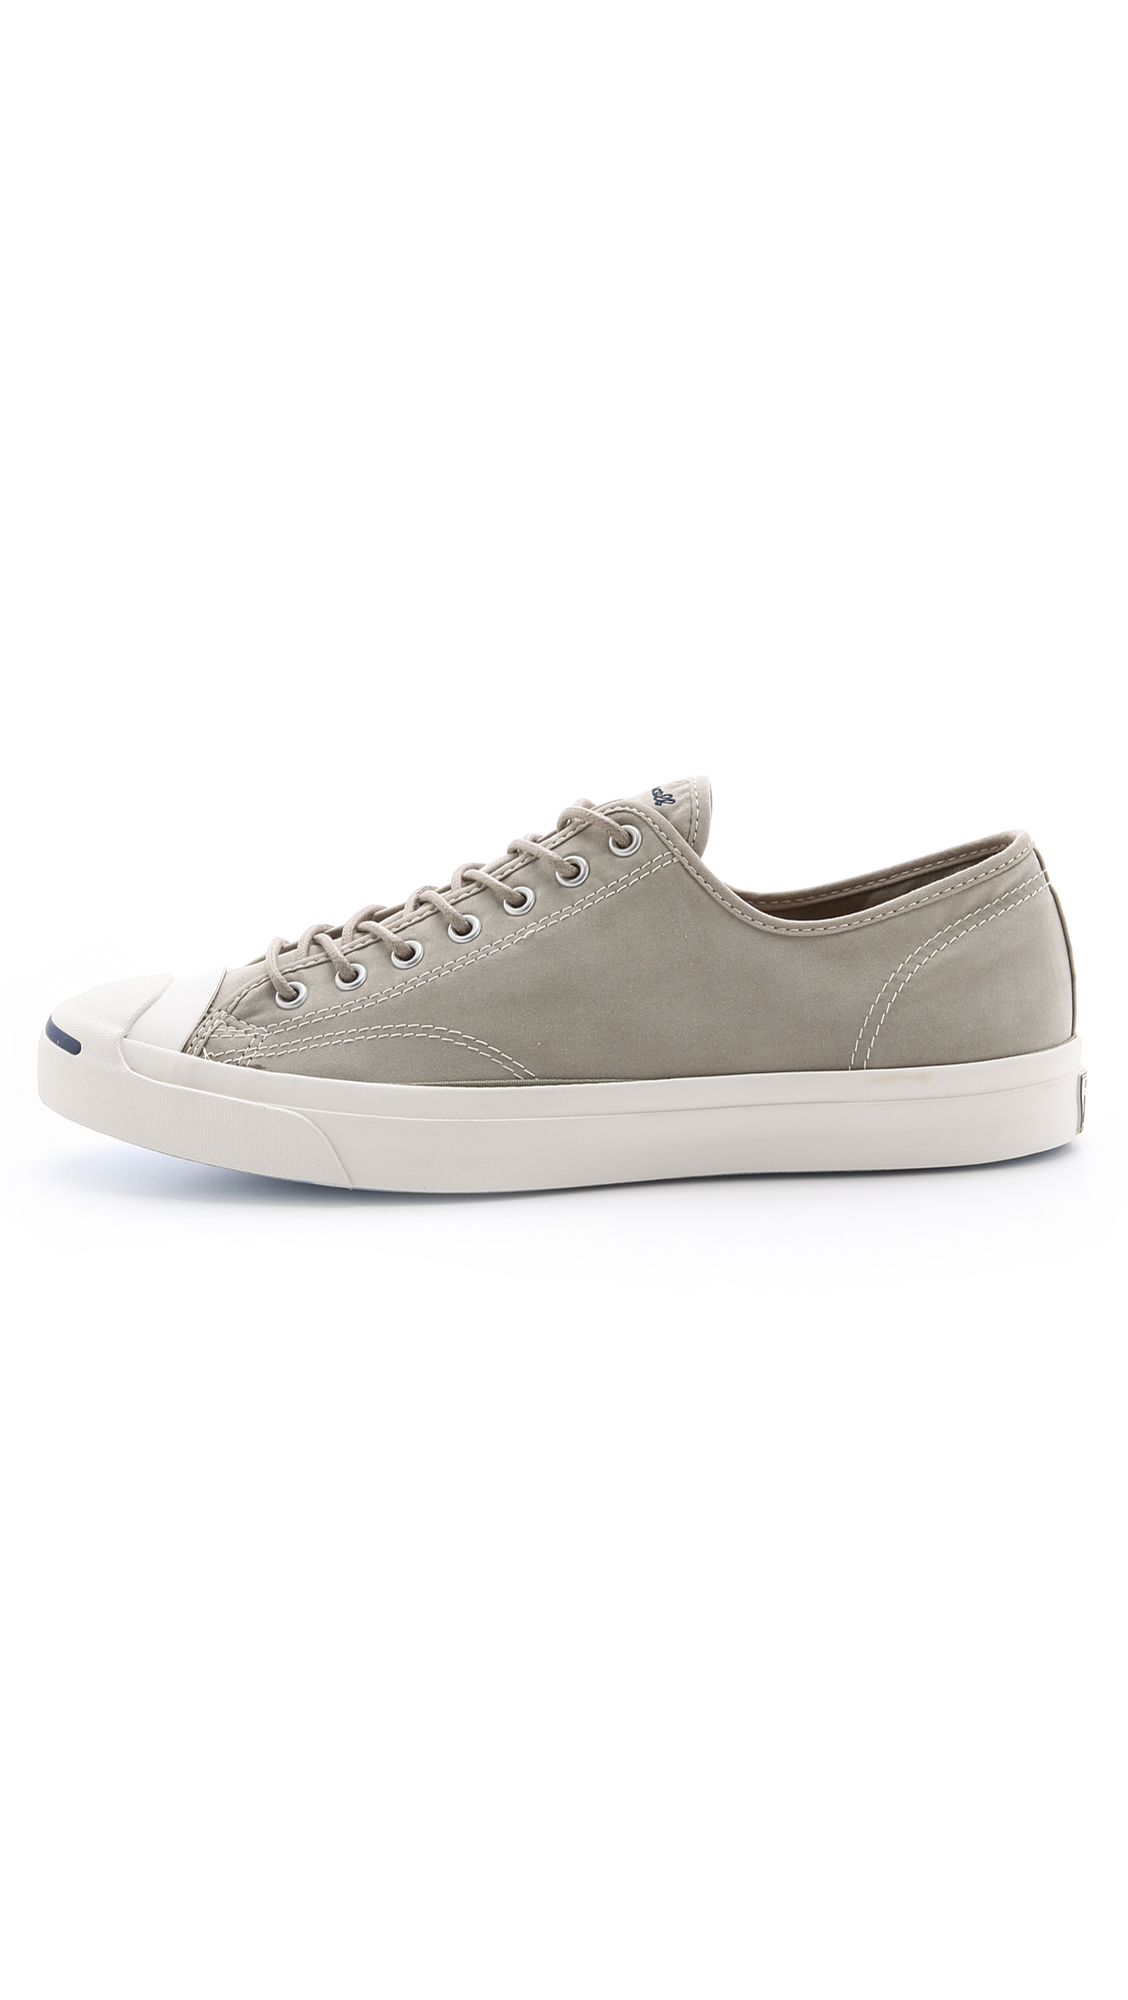 Lyst - Converse Jack Purcell Twill Sneakers in Gray for Men